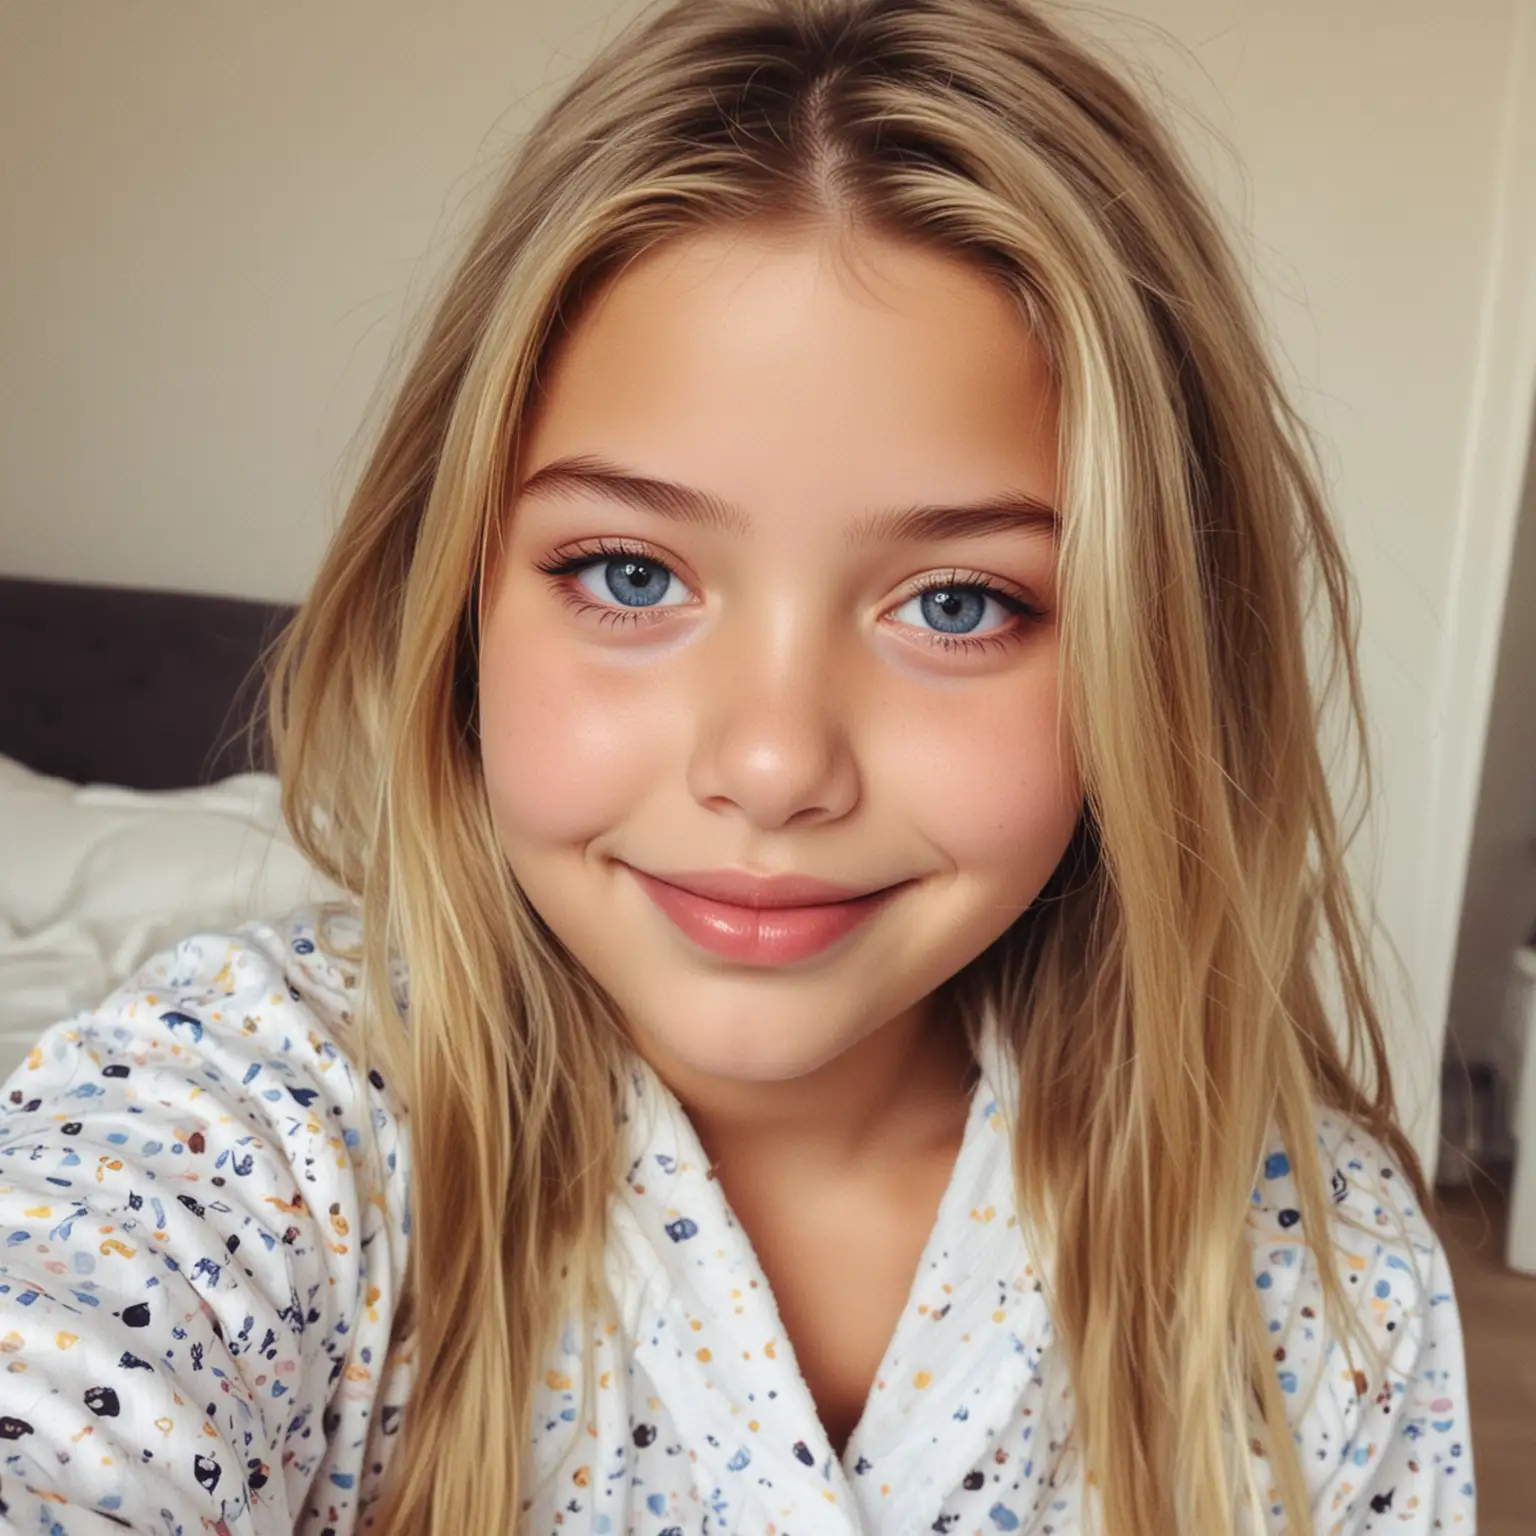 Blonde French Teen Girl Excitedly Selfieing in Cute Pajamas